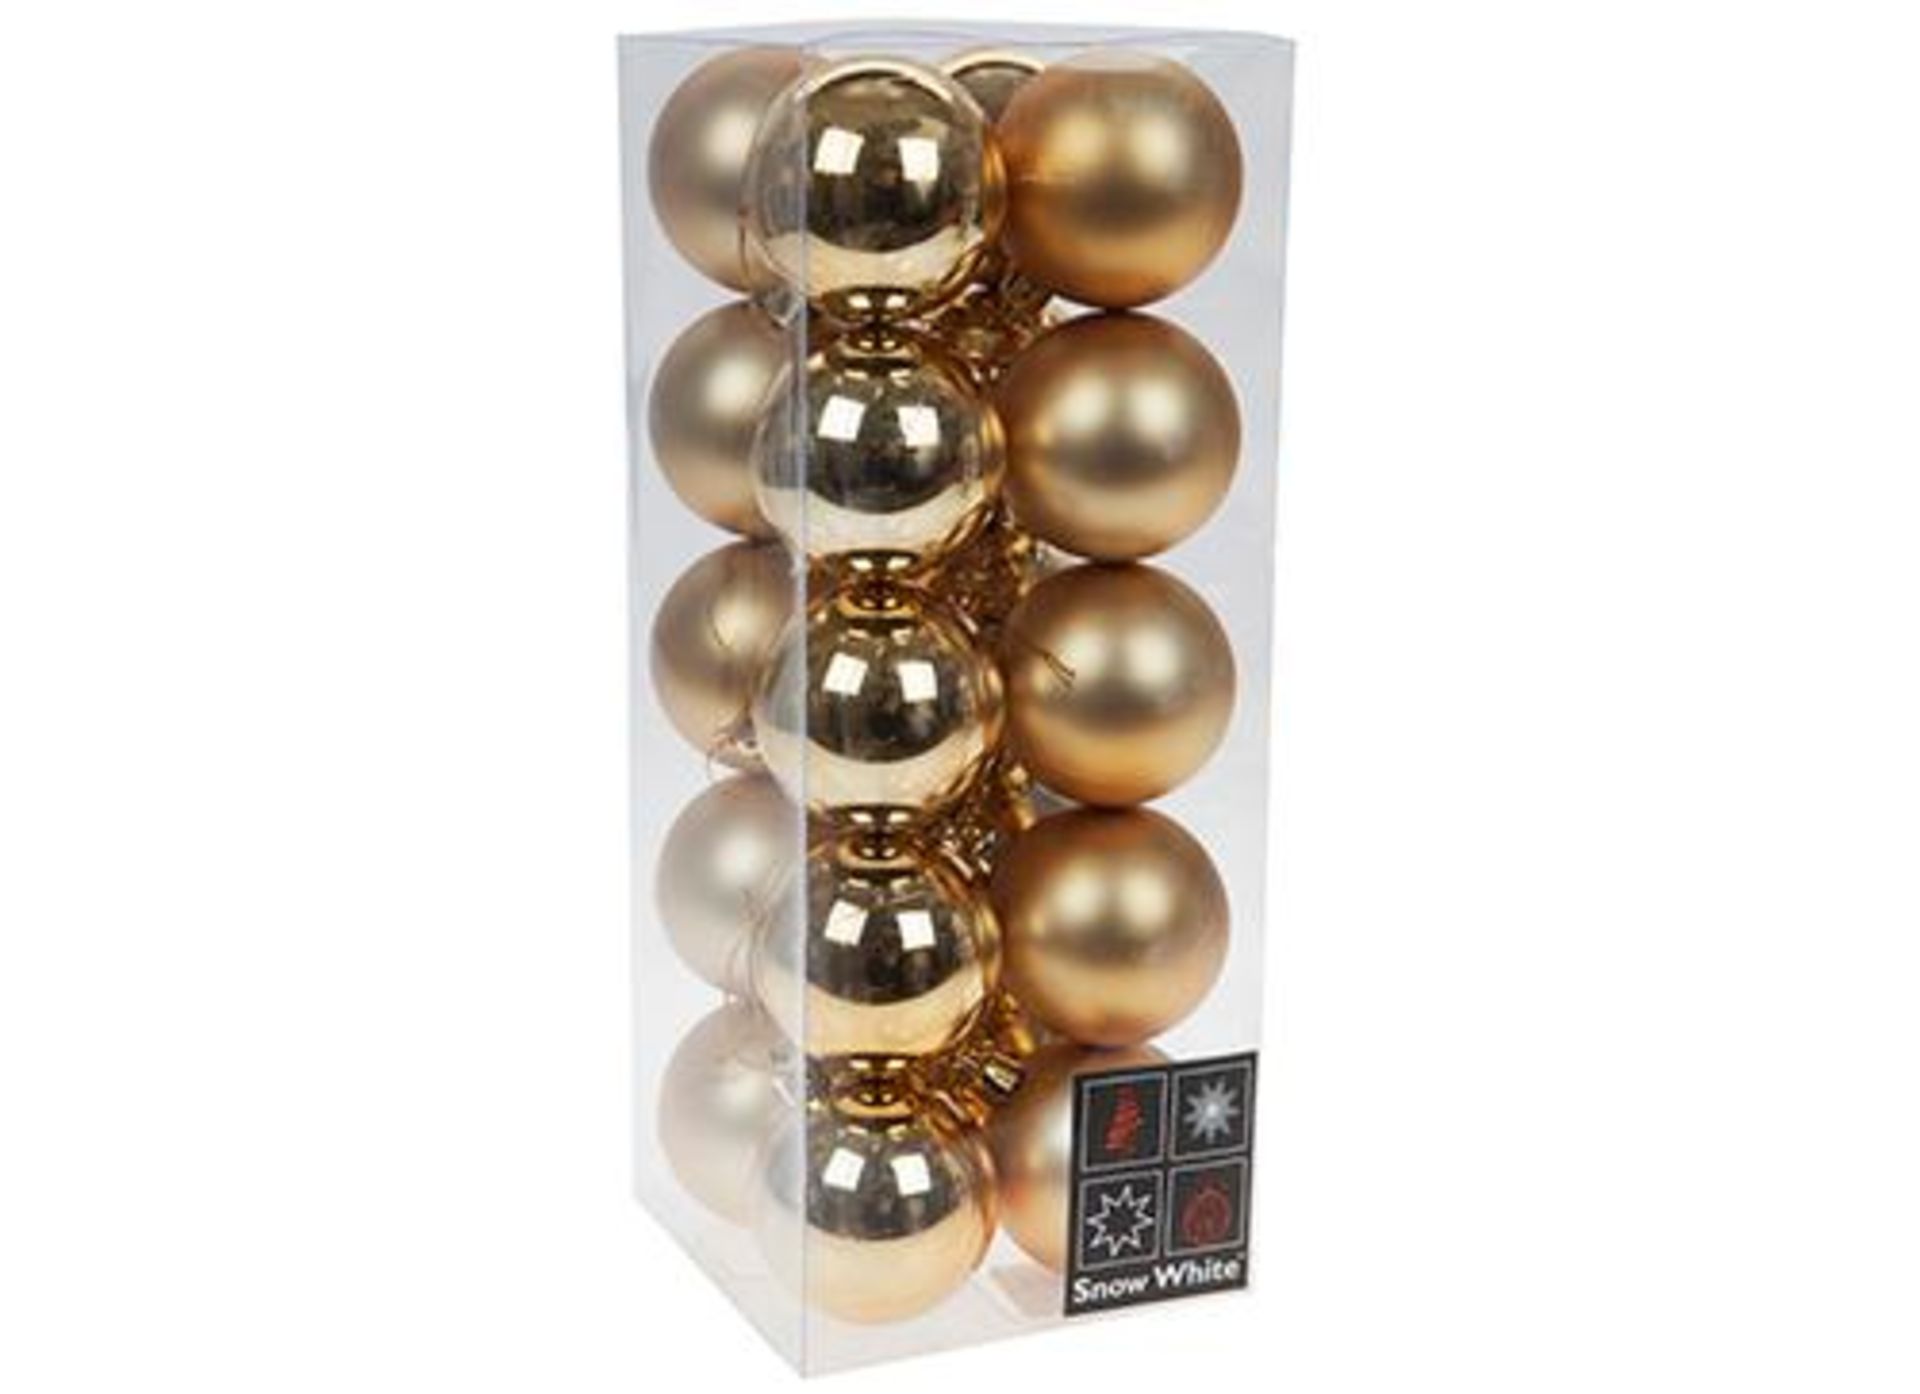 V Brand New Set Of 20 Luxury Christmas Baubles X 2 YOUR BID PRICE TO BE MULTIPLIED BY TWO